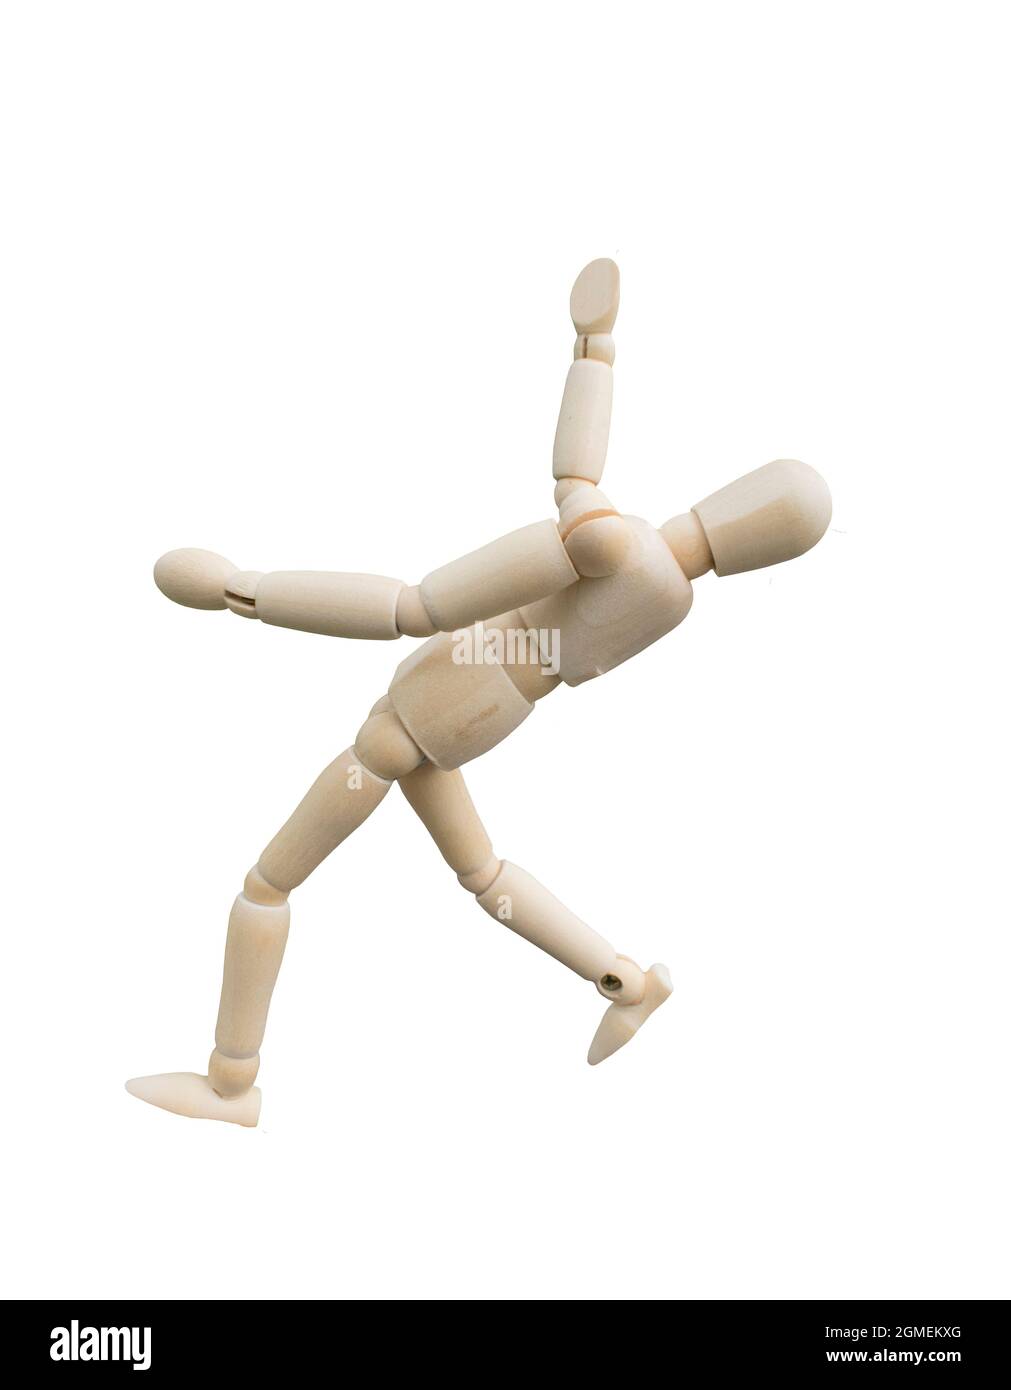 Falling accident concept. Wooden puppet act like slip down the floor on white background. Stock Photo